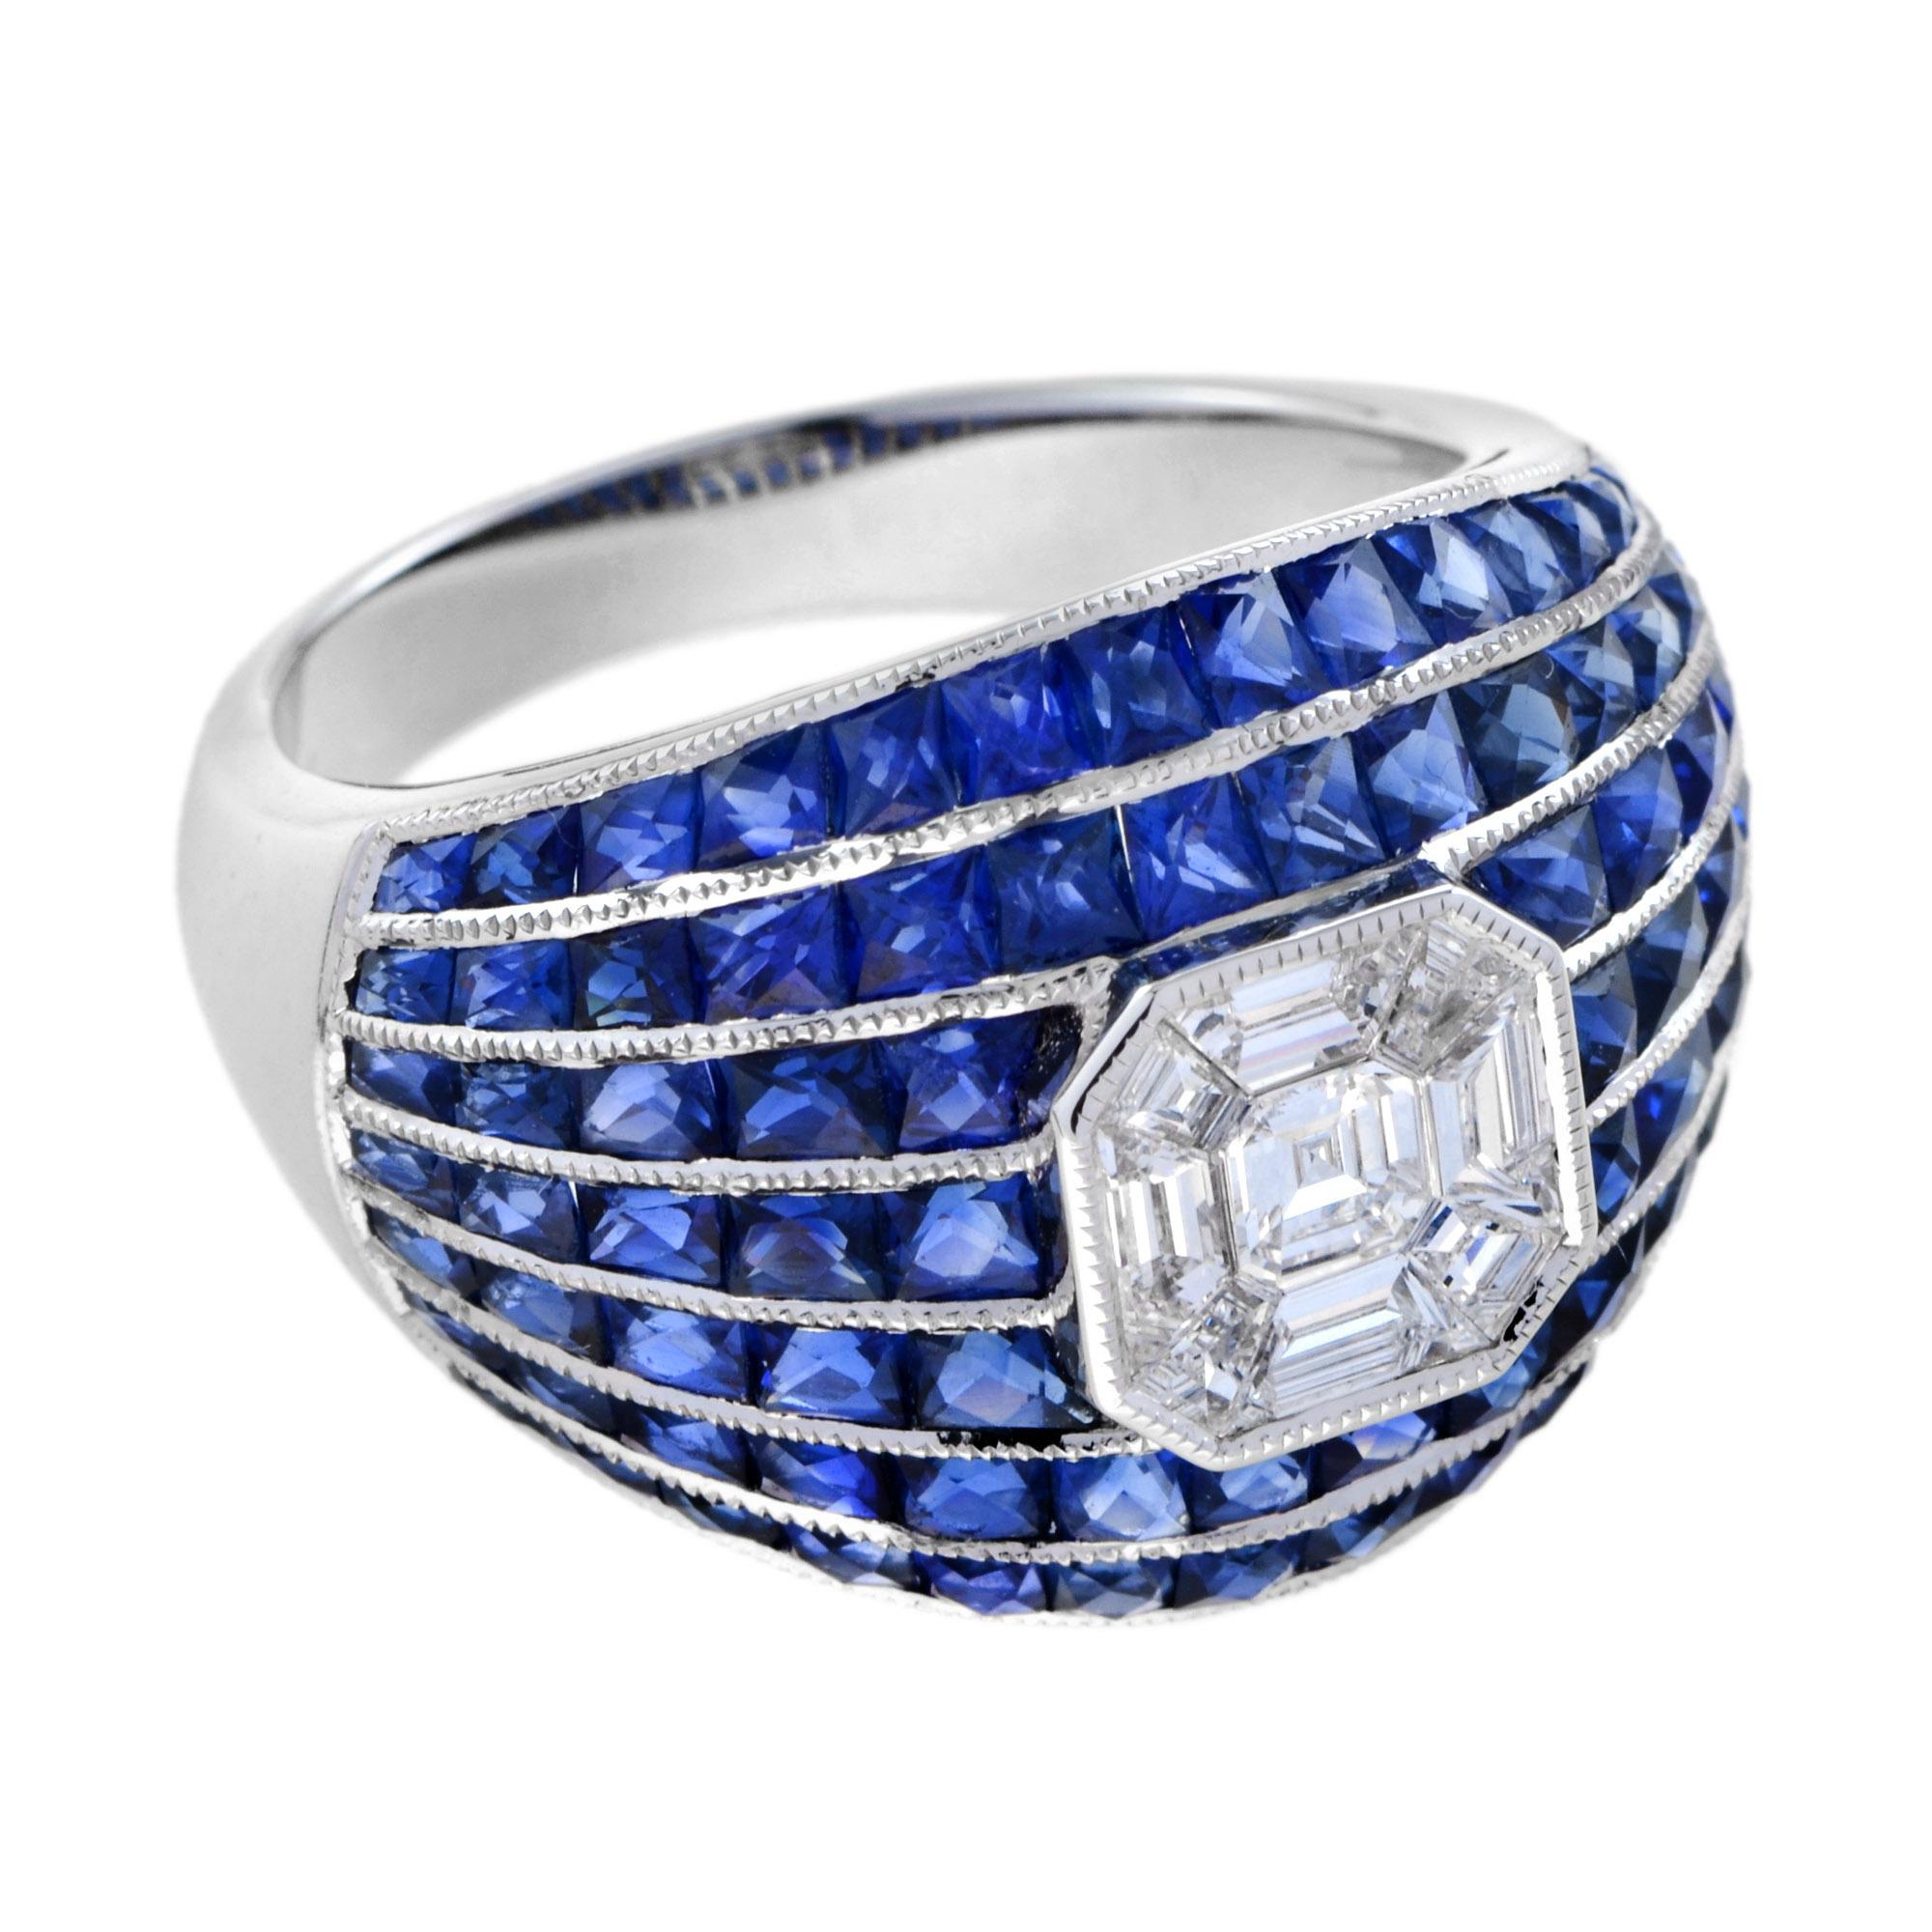 This piece of jewelry is a precise combination multiple special cut diamonds illusion set in an asscher shape of 0.55 carats for its center and 12.05 carats French cut blue sapphire set in channel setting 18k white gold. This timeless design ring